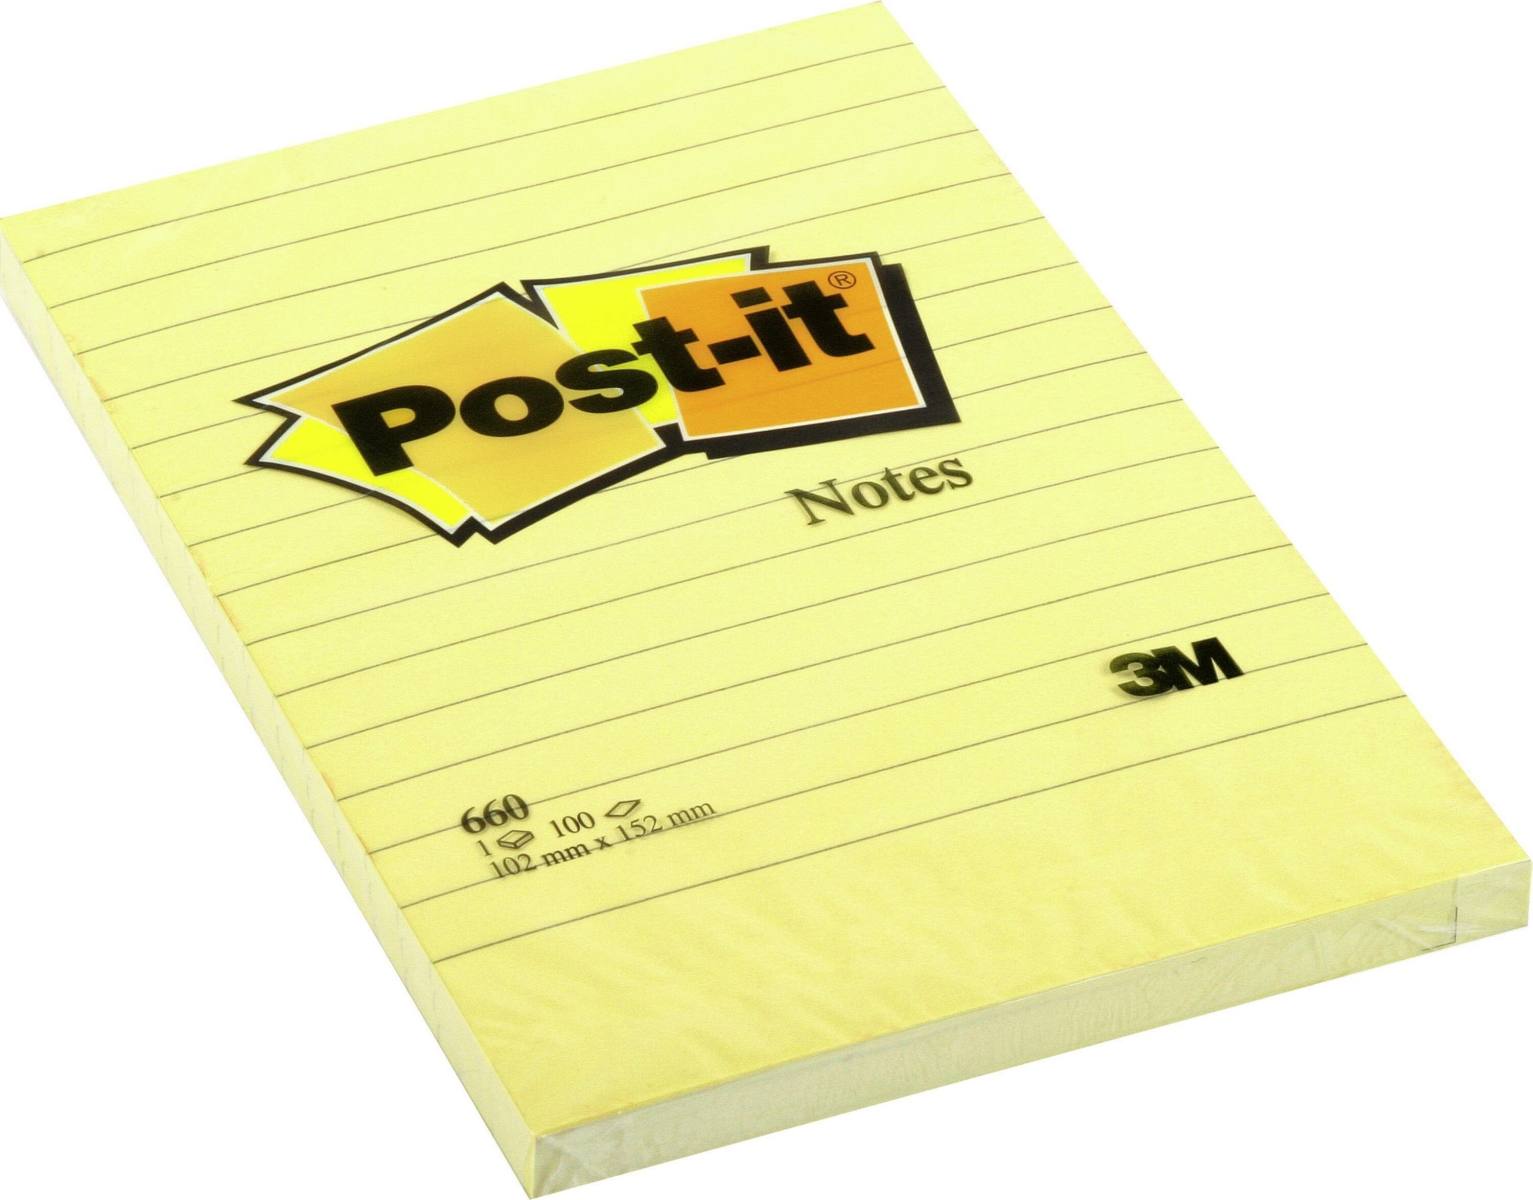 3M Post-it Notes 660, 102 mm x 152 mm, yellow, 1 pad of 100 sheets